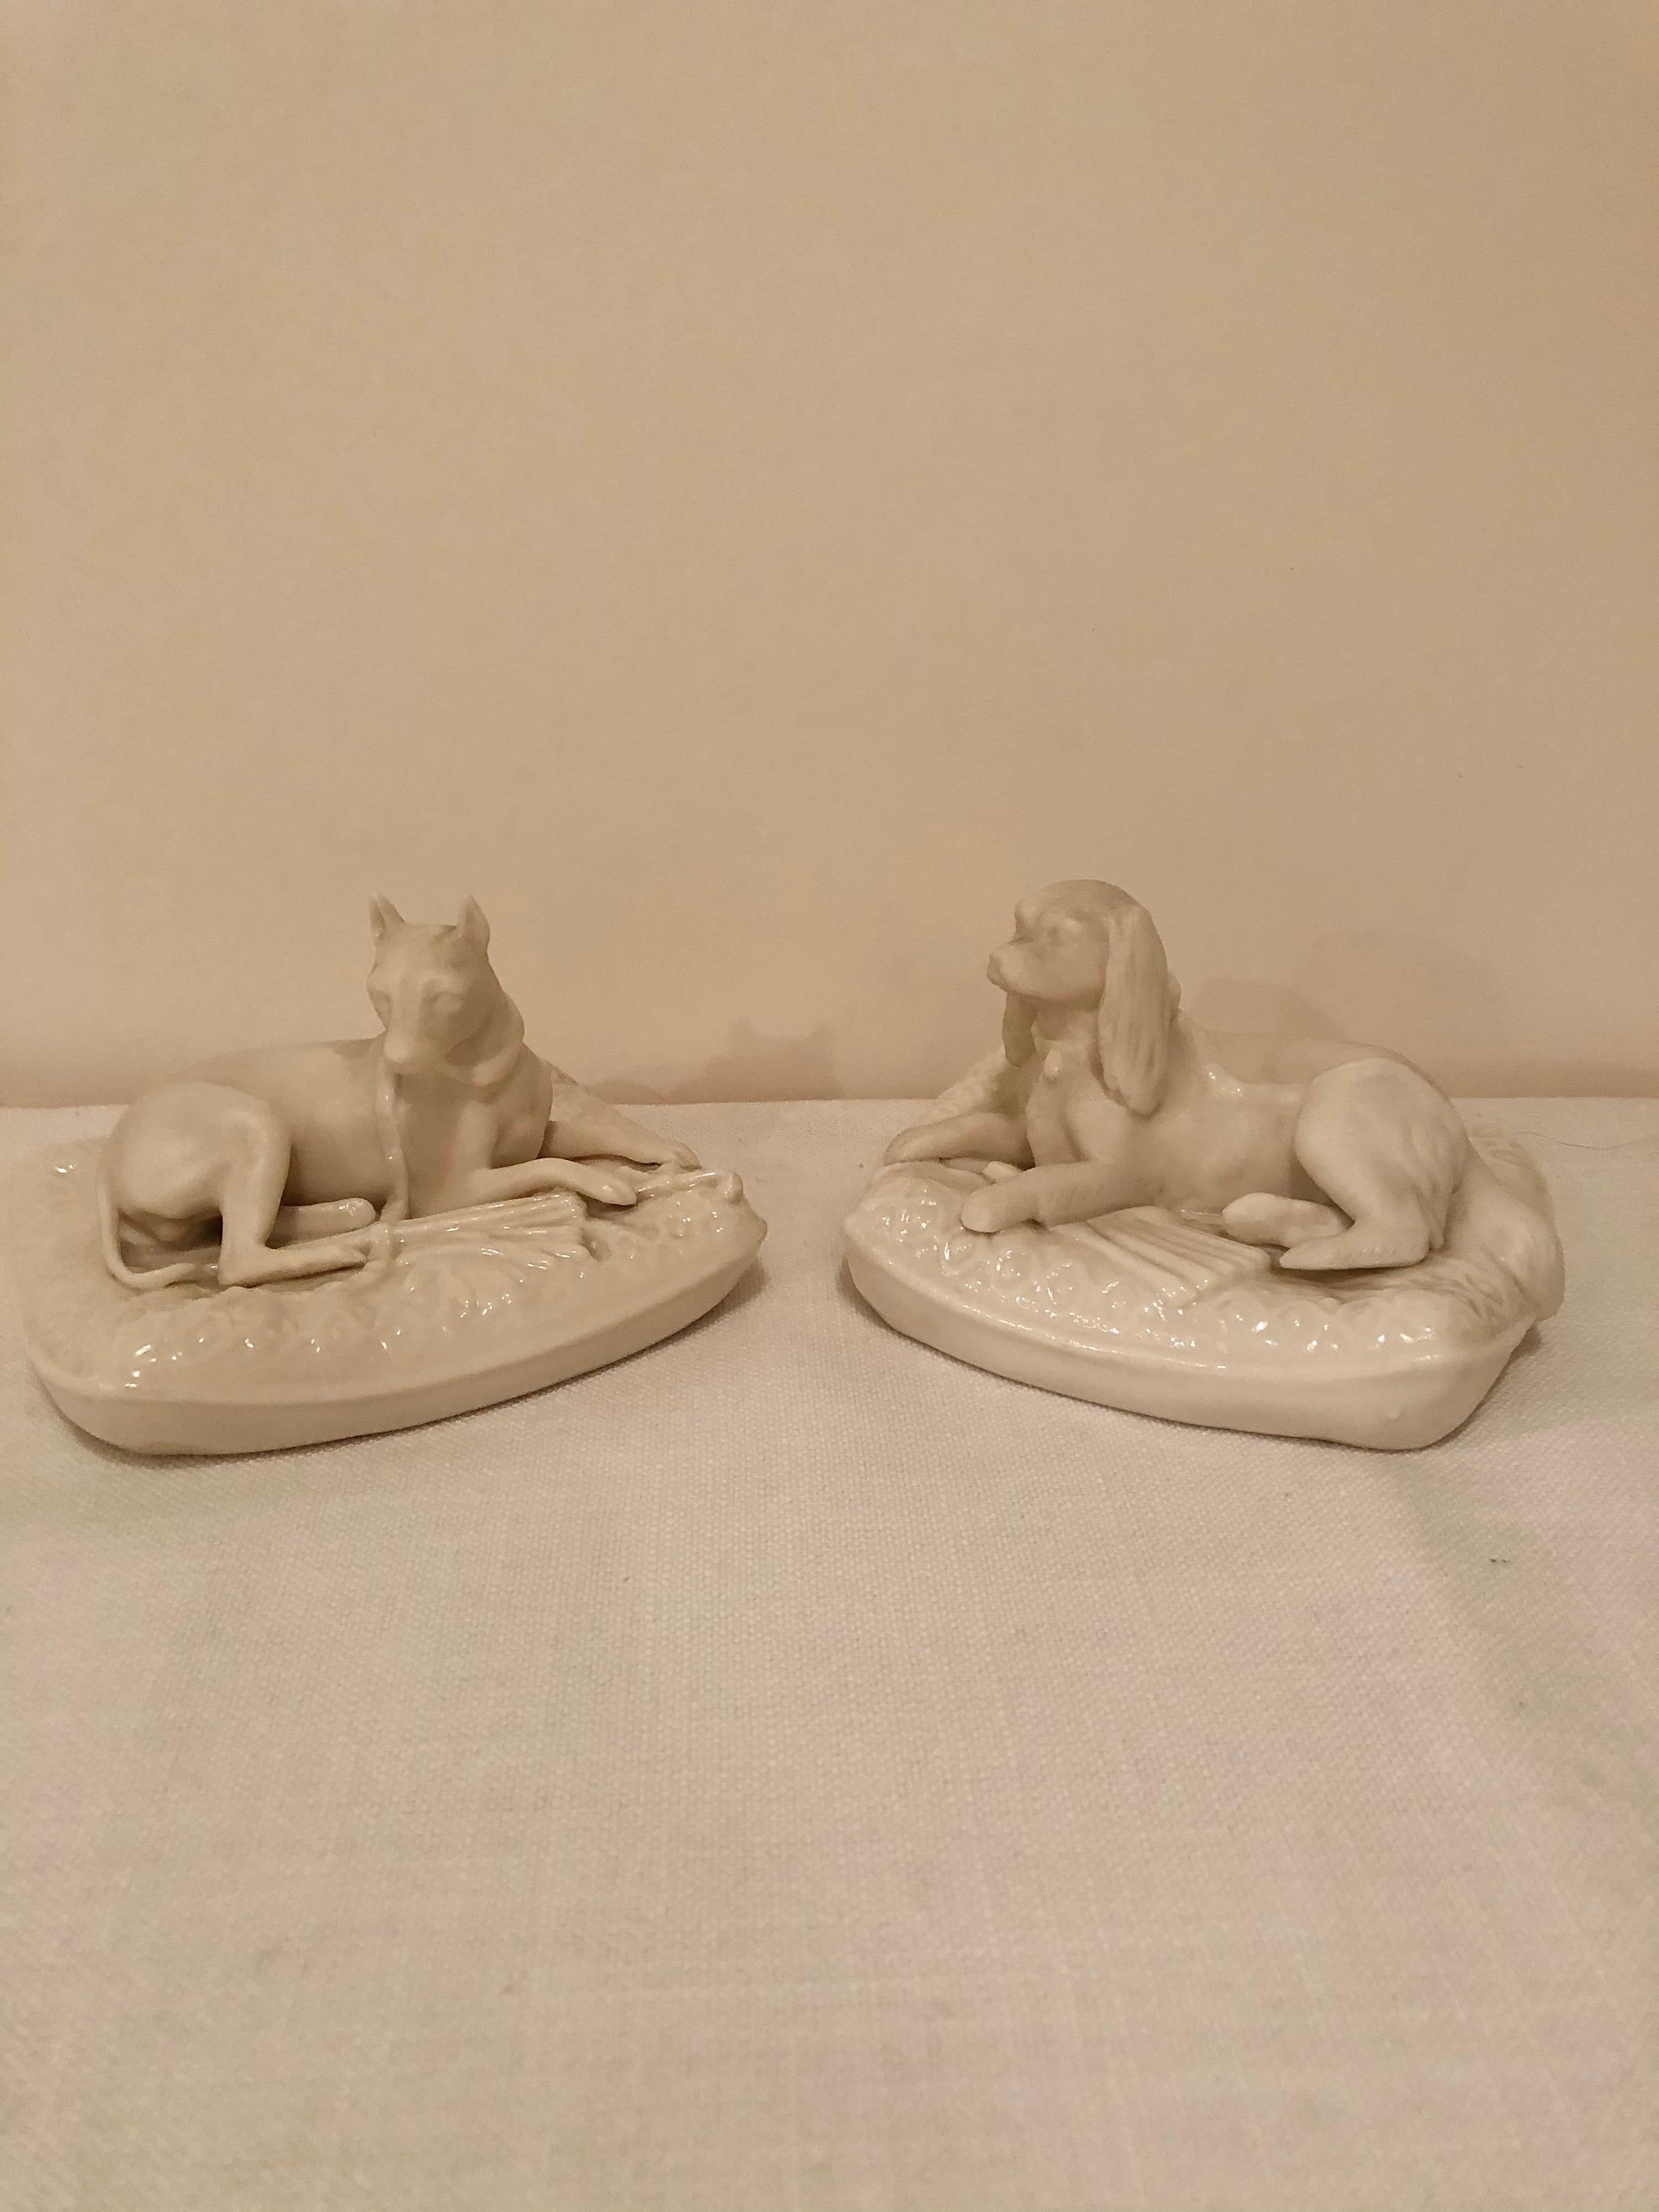 Molded Pair of Rare Irish Belleek Figures of Dogs on Their Pillow Beds